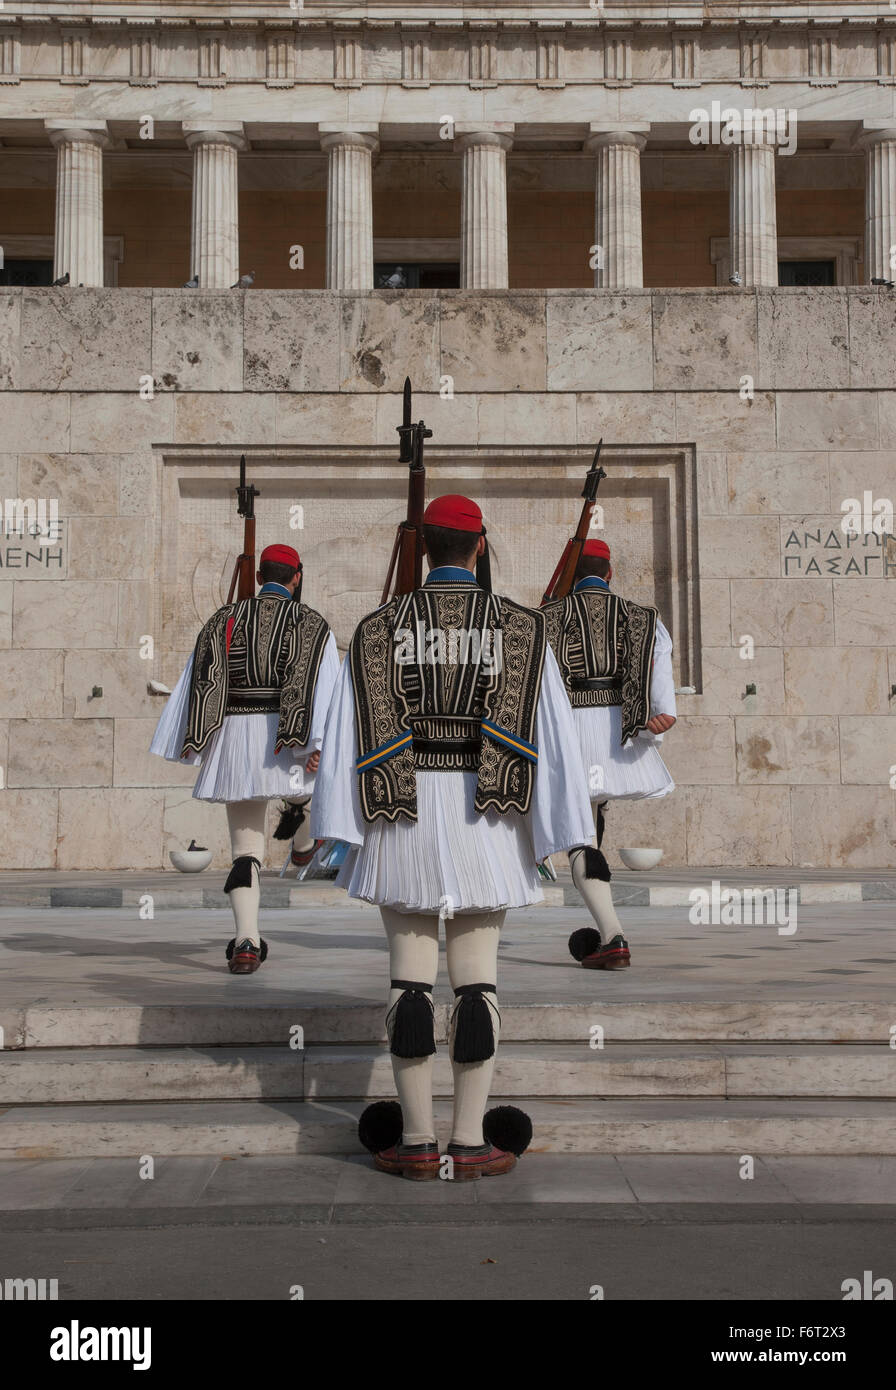 Soldiers guarding Parliament building, Athens, Greece Stock Photo